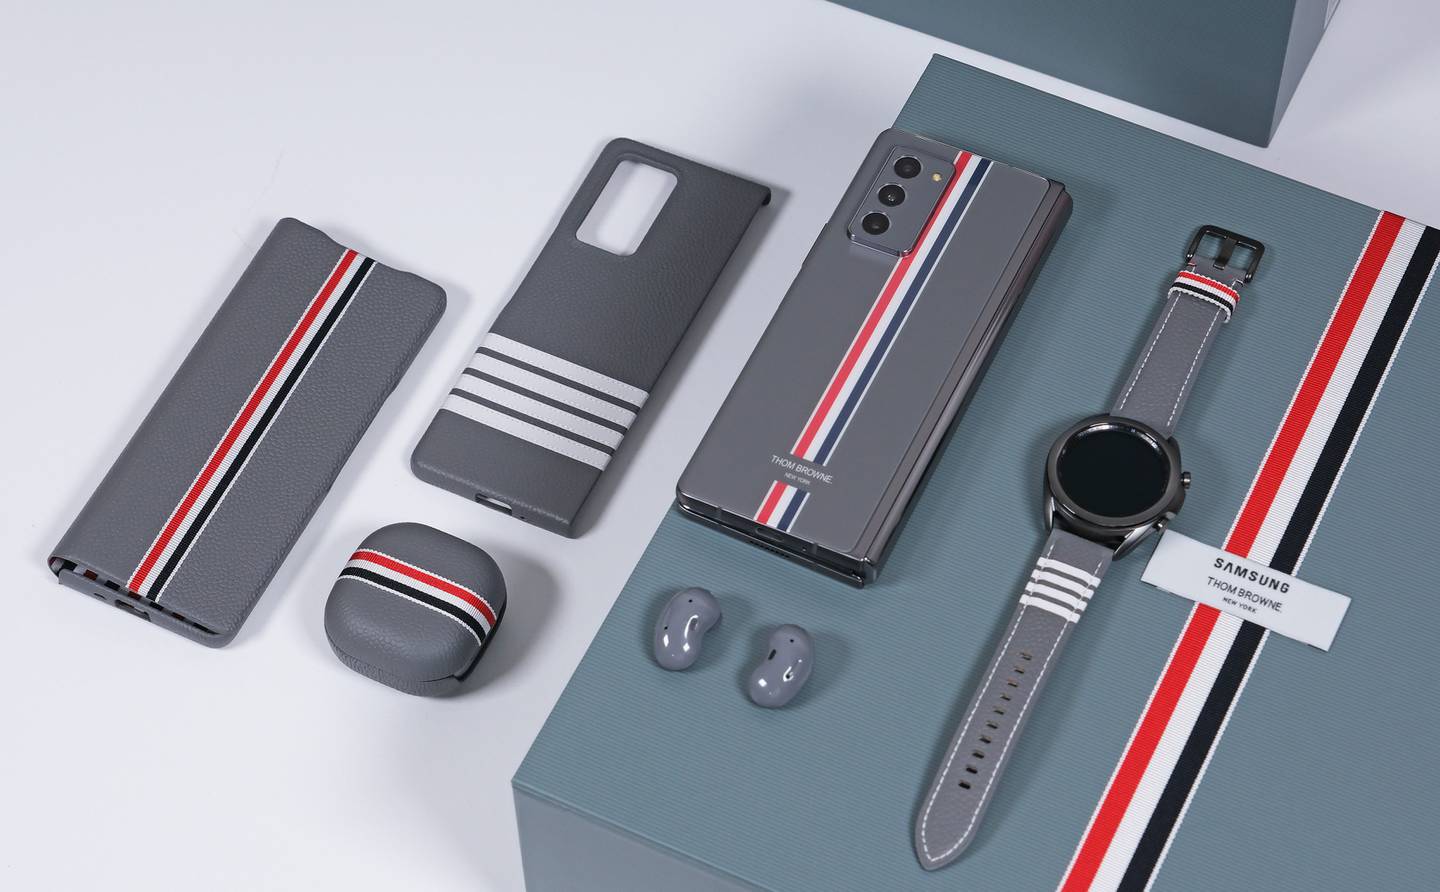 Thom Browne's use of stripes was part of a 2020 collaboration with Samsung. Shutterstock